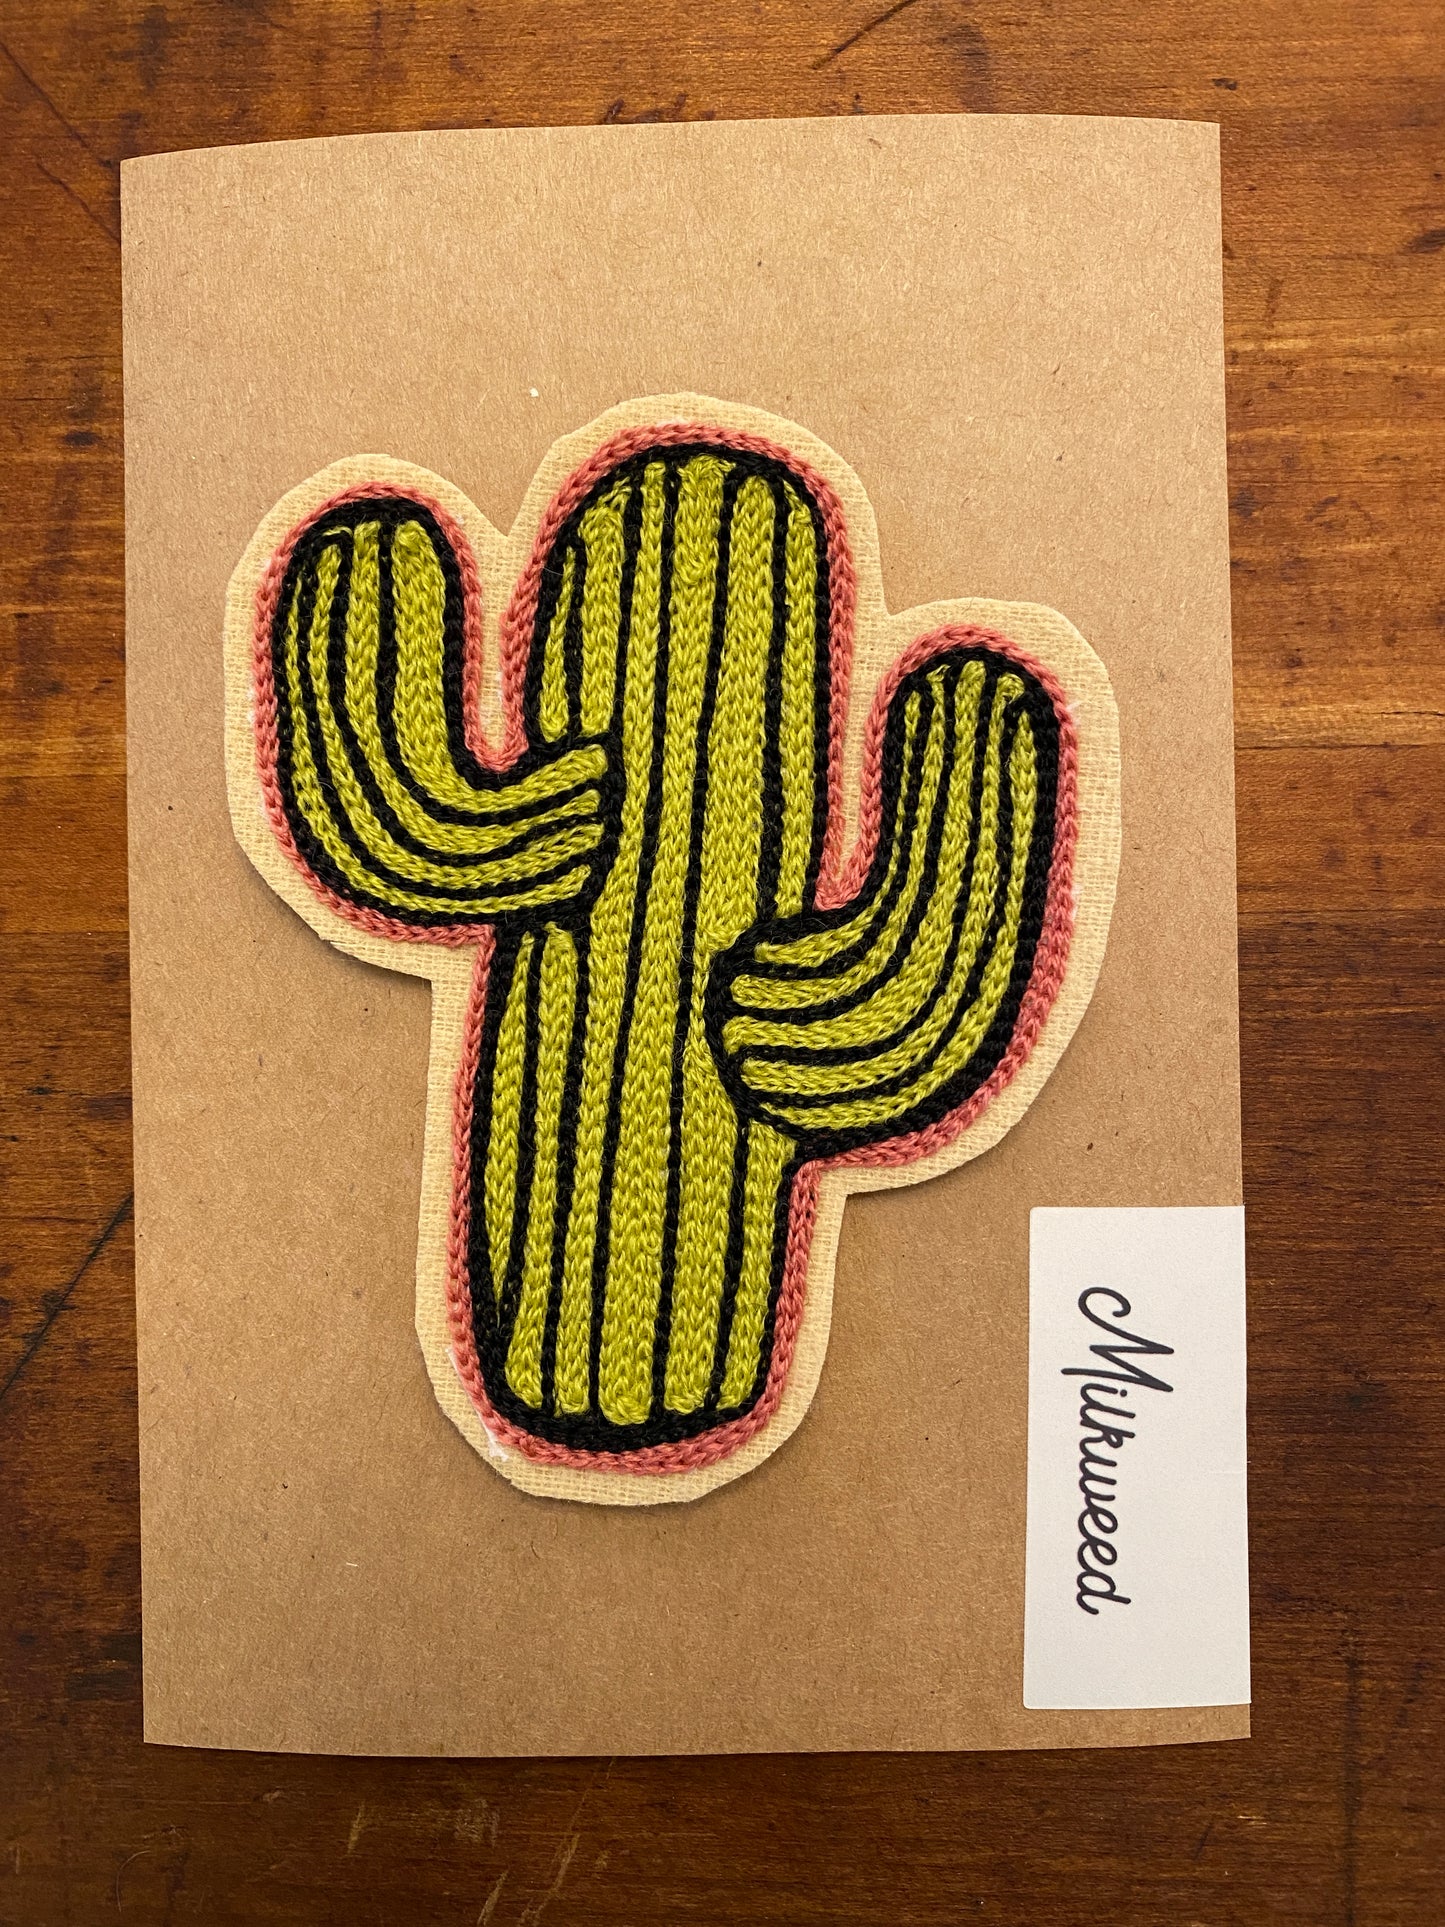 Chunky Cactus Chain Stitched Patch